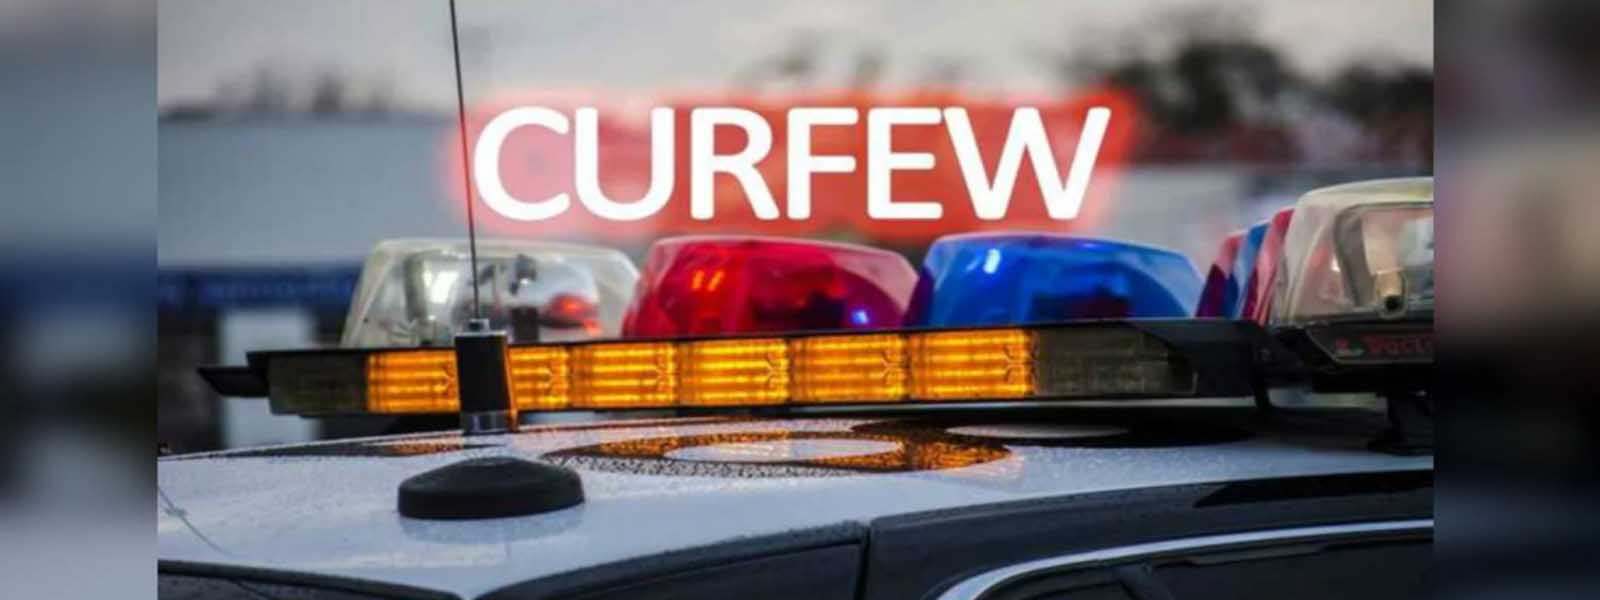 UPDATE: Quarantine Curfew ONLY for 04 Police Jurisdictions